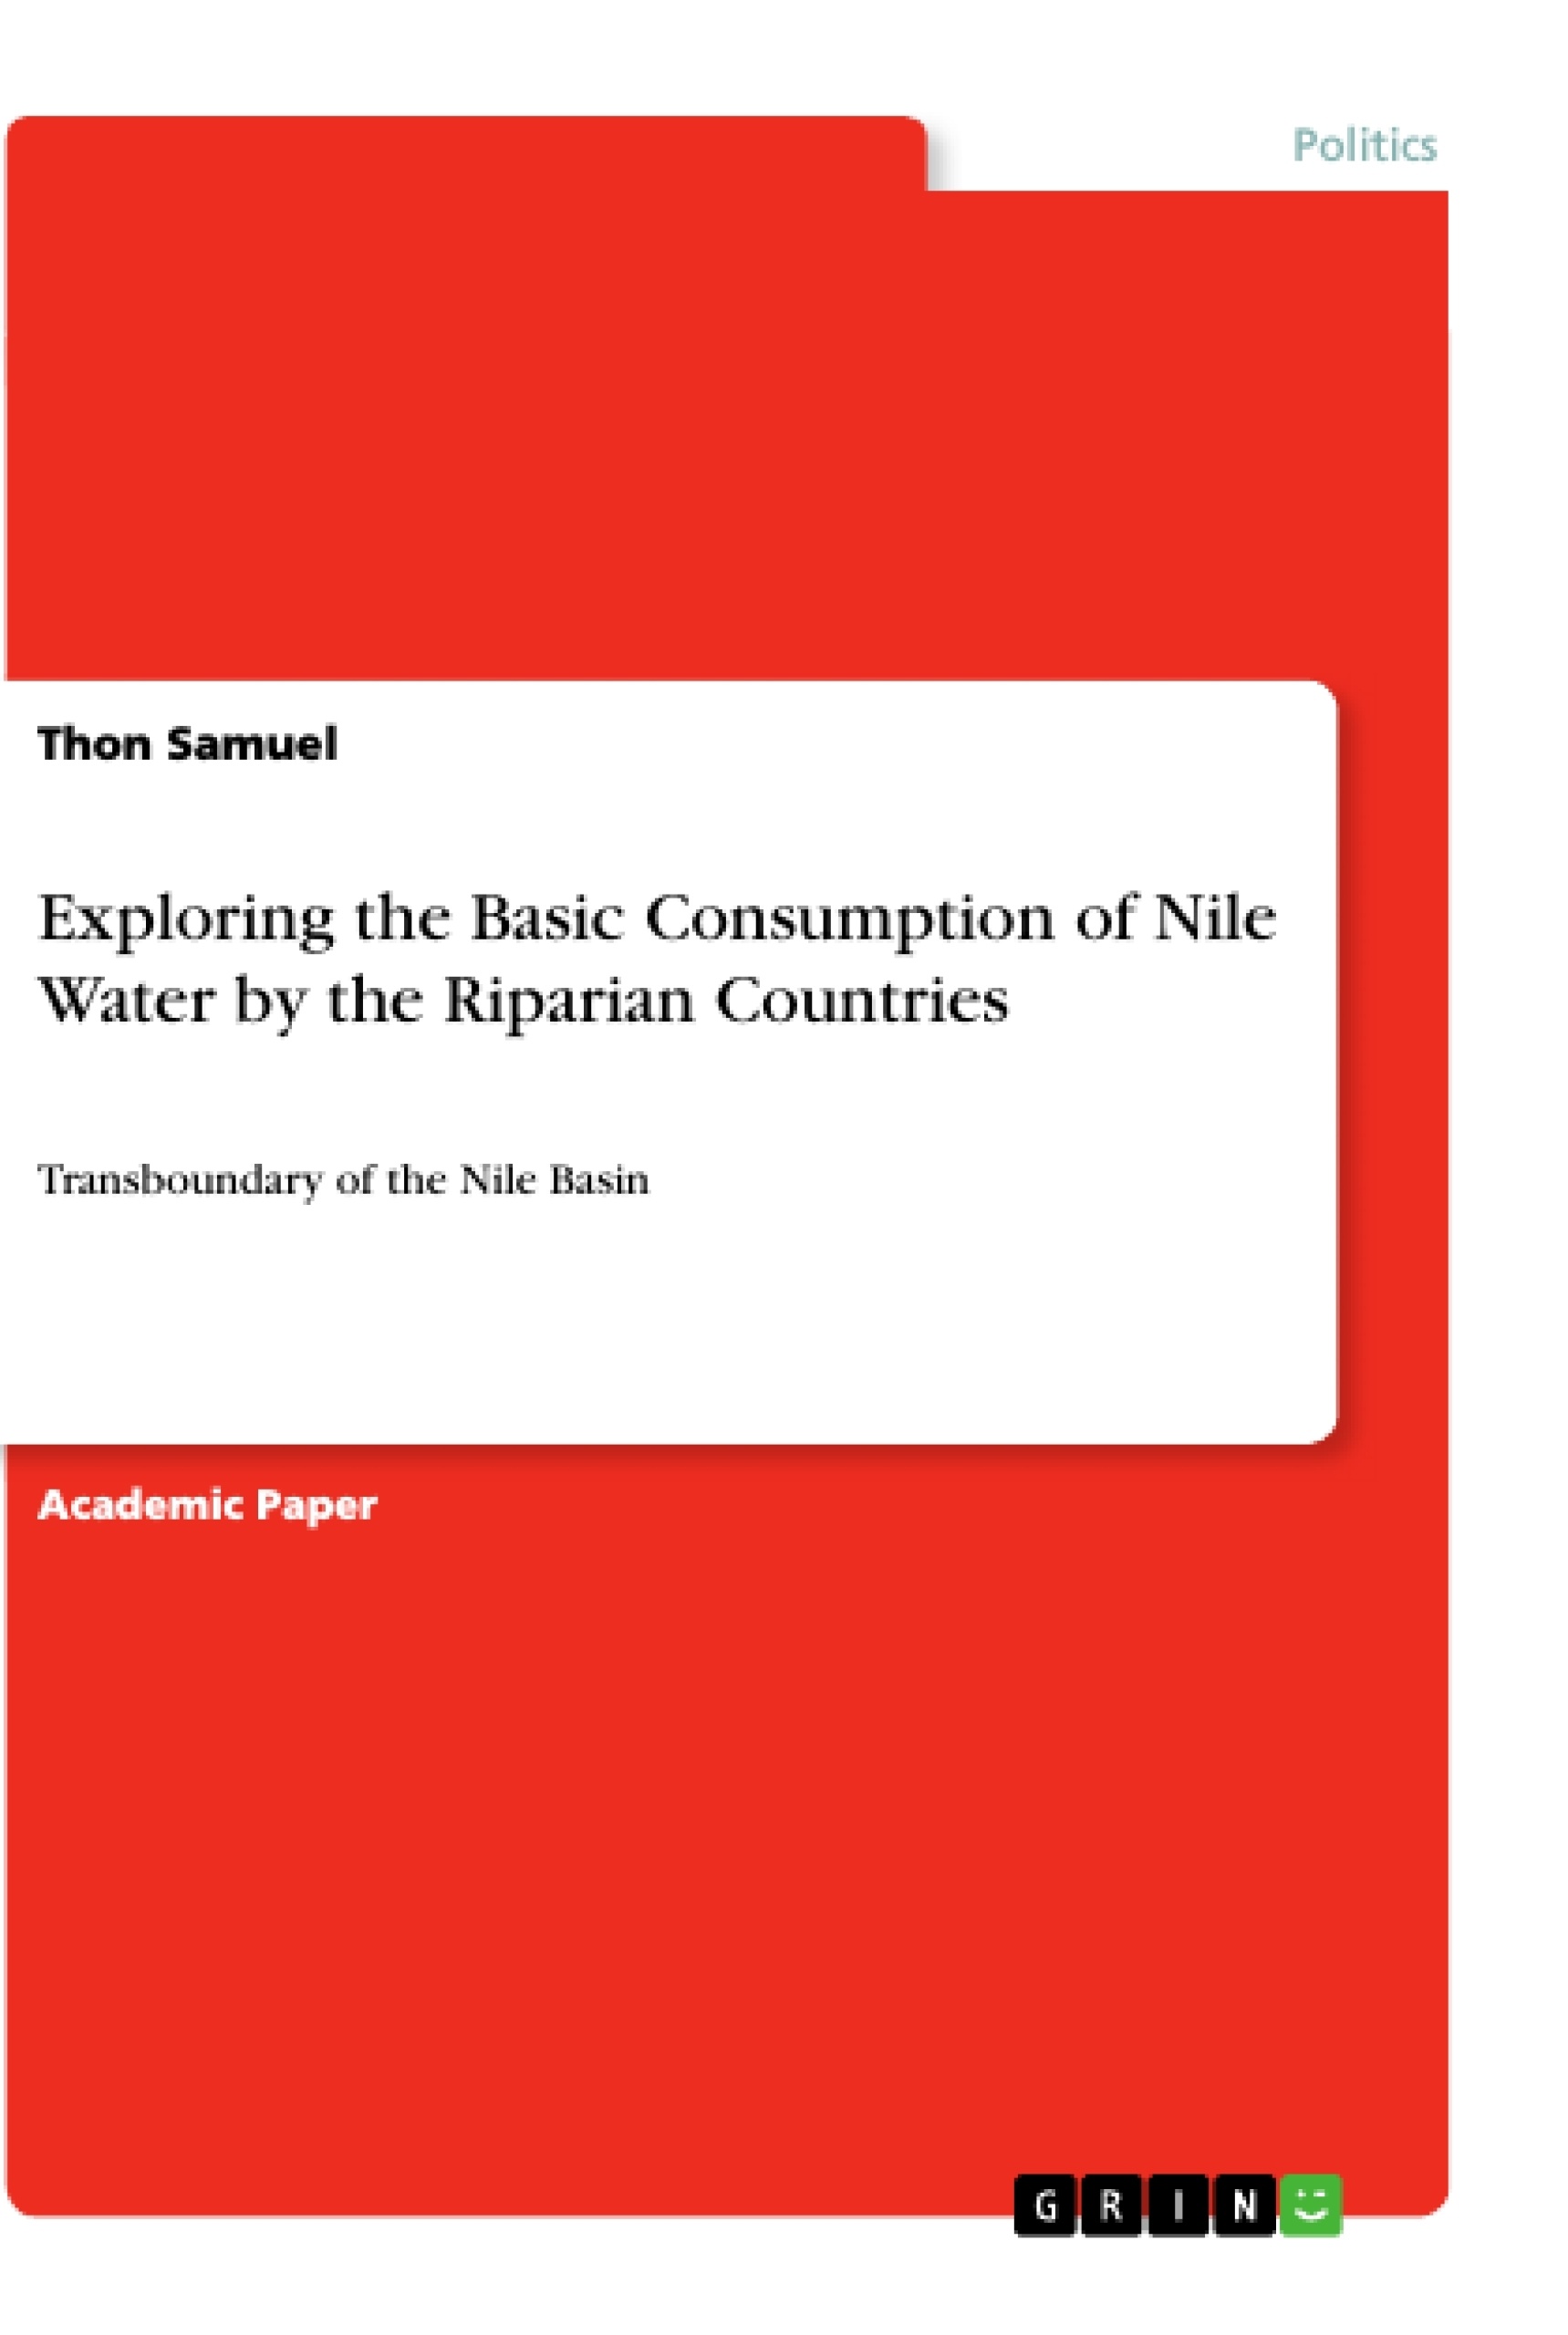 Título: Exploring the Basic Consumption of Nile Water by the Riparian Countries